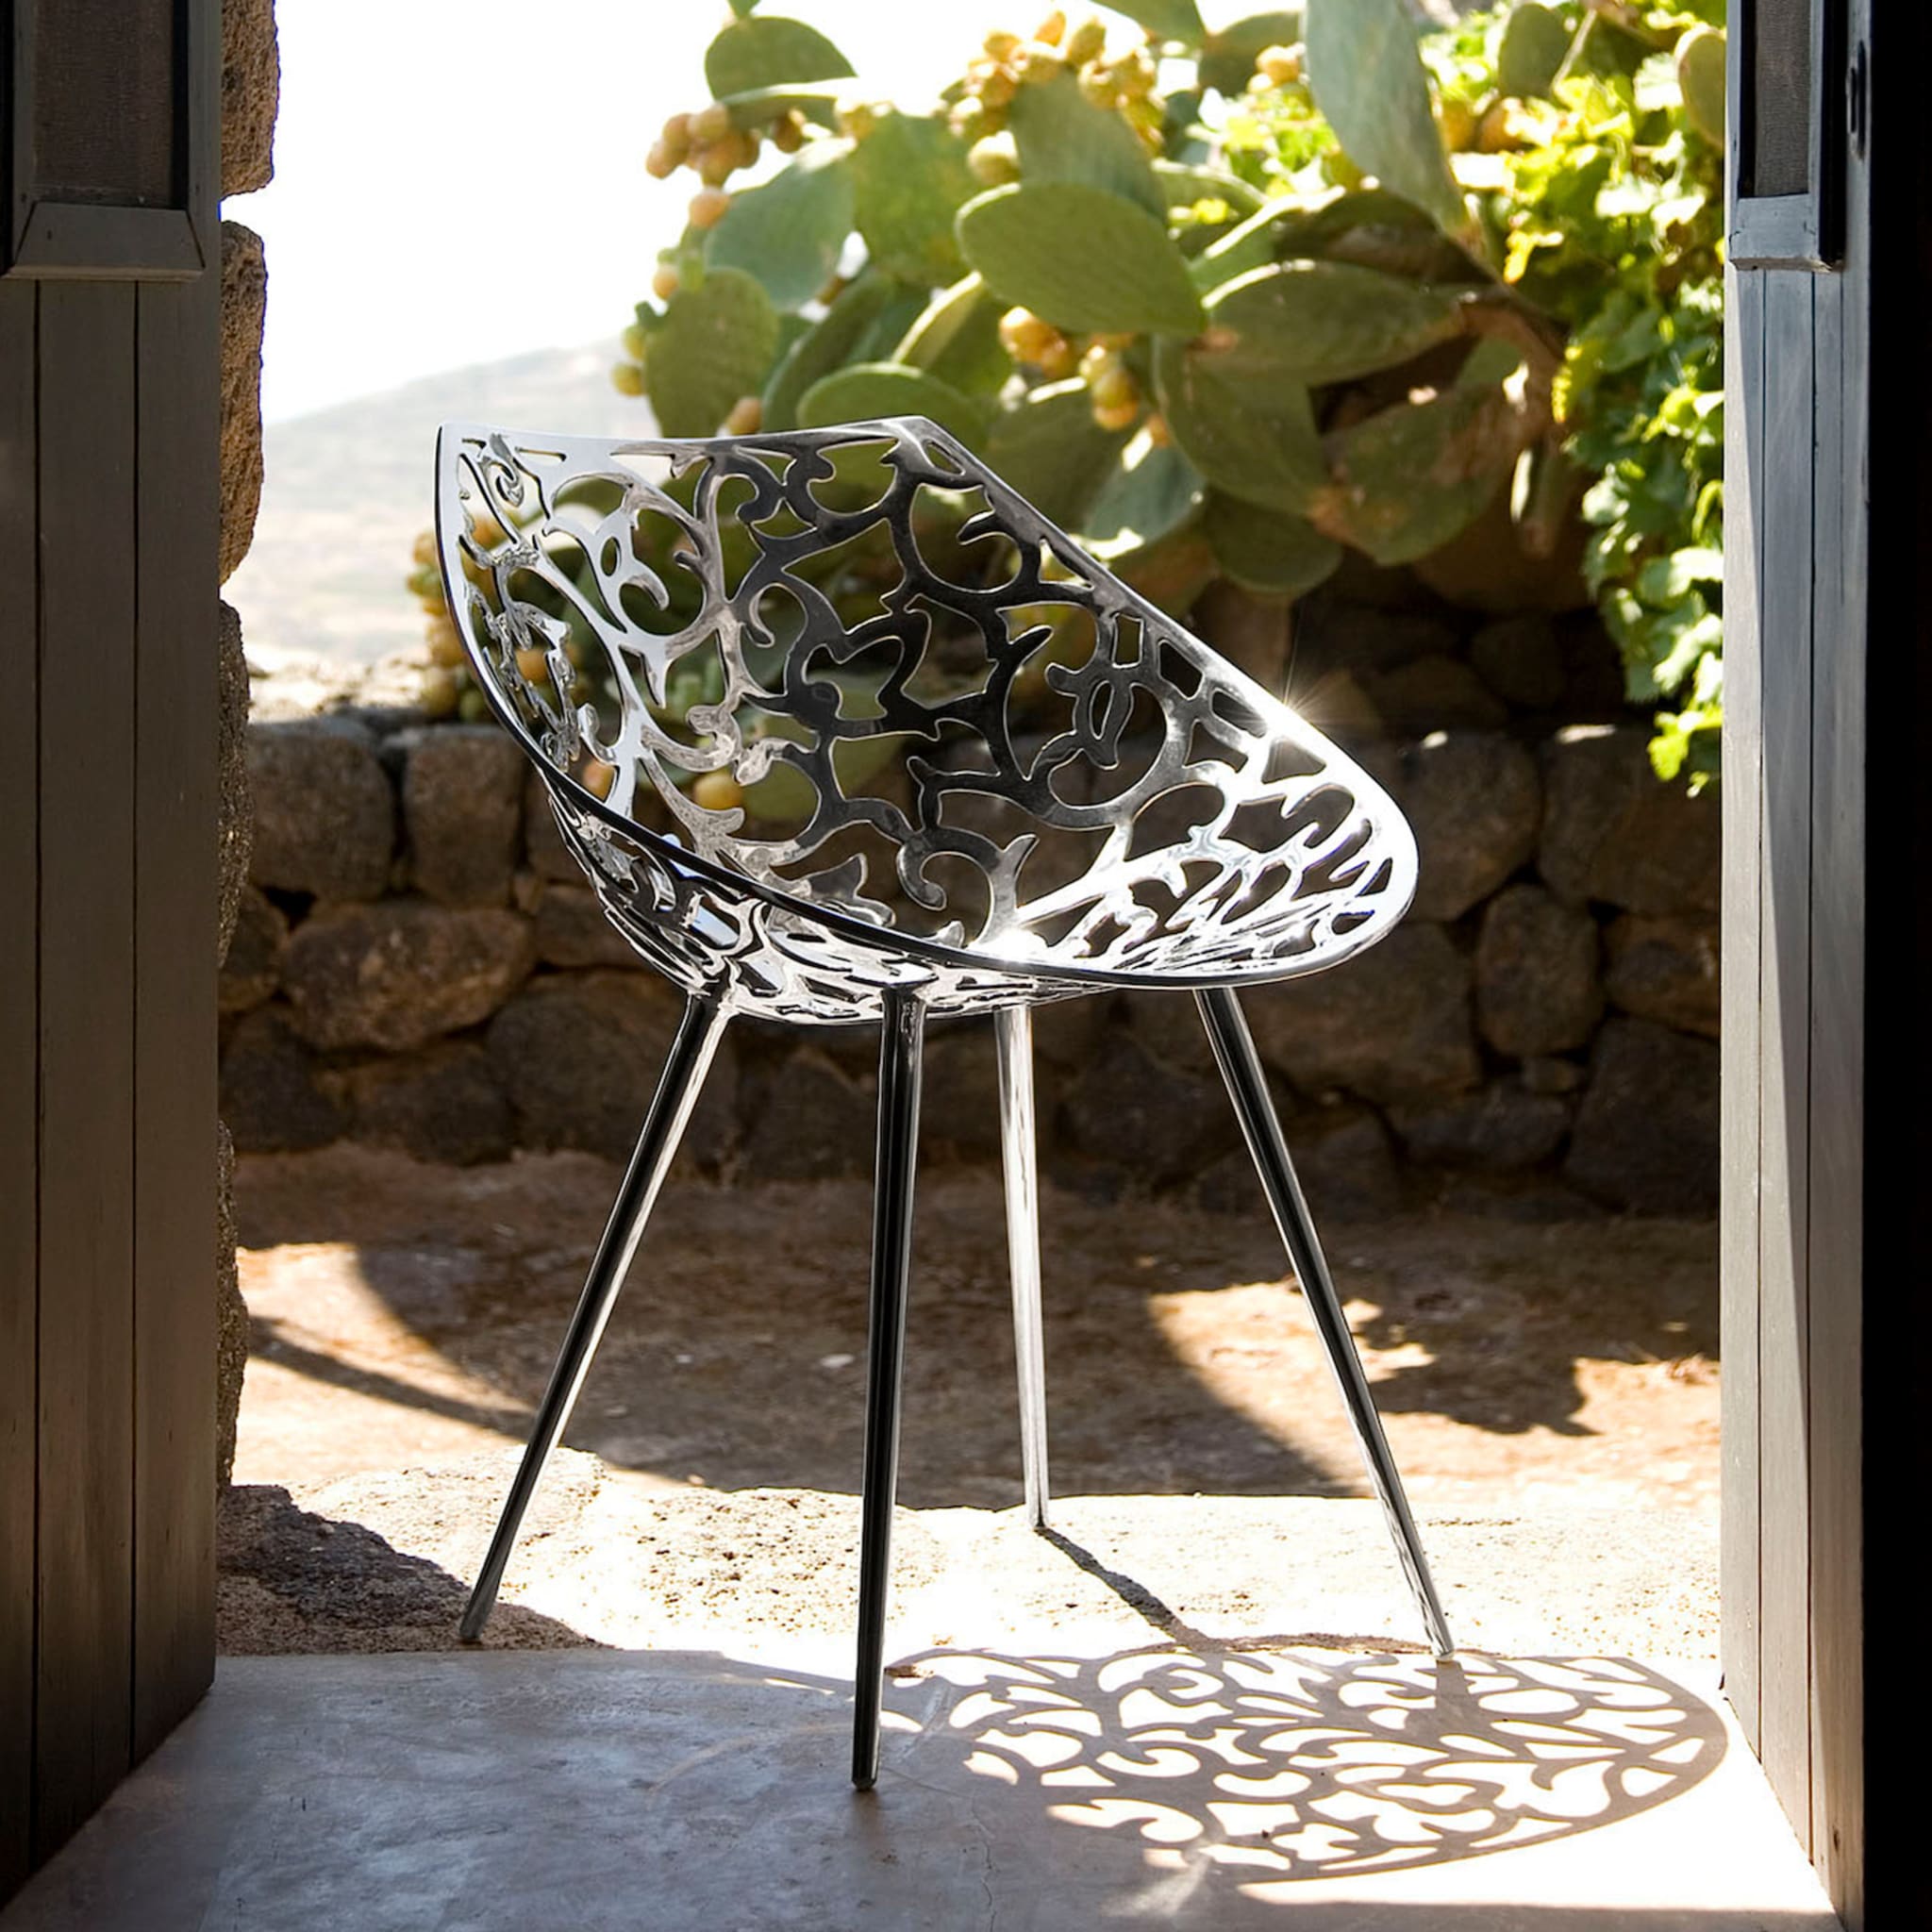 Miss Lacy Openwork Silvery Chair by Philippe Stark - Alternative view 1